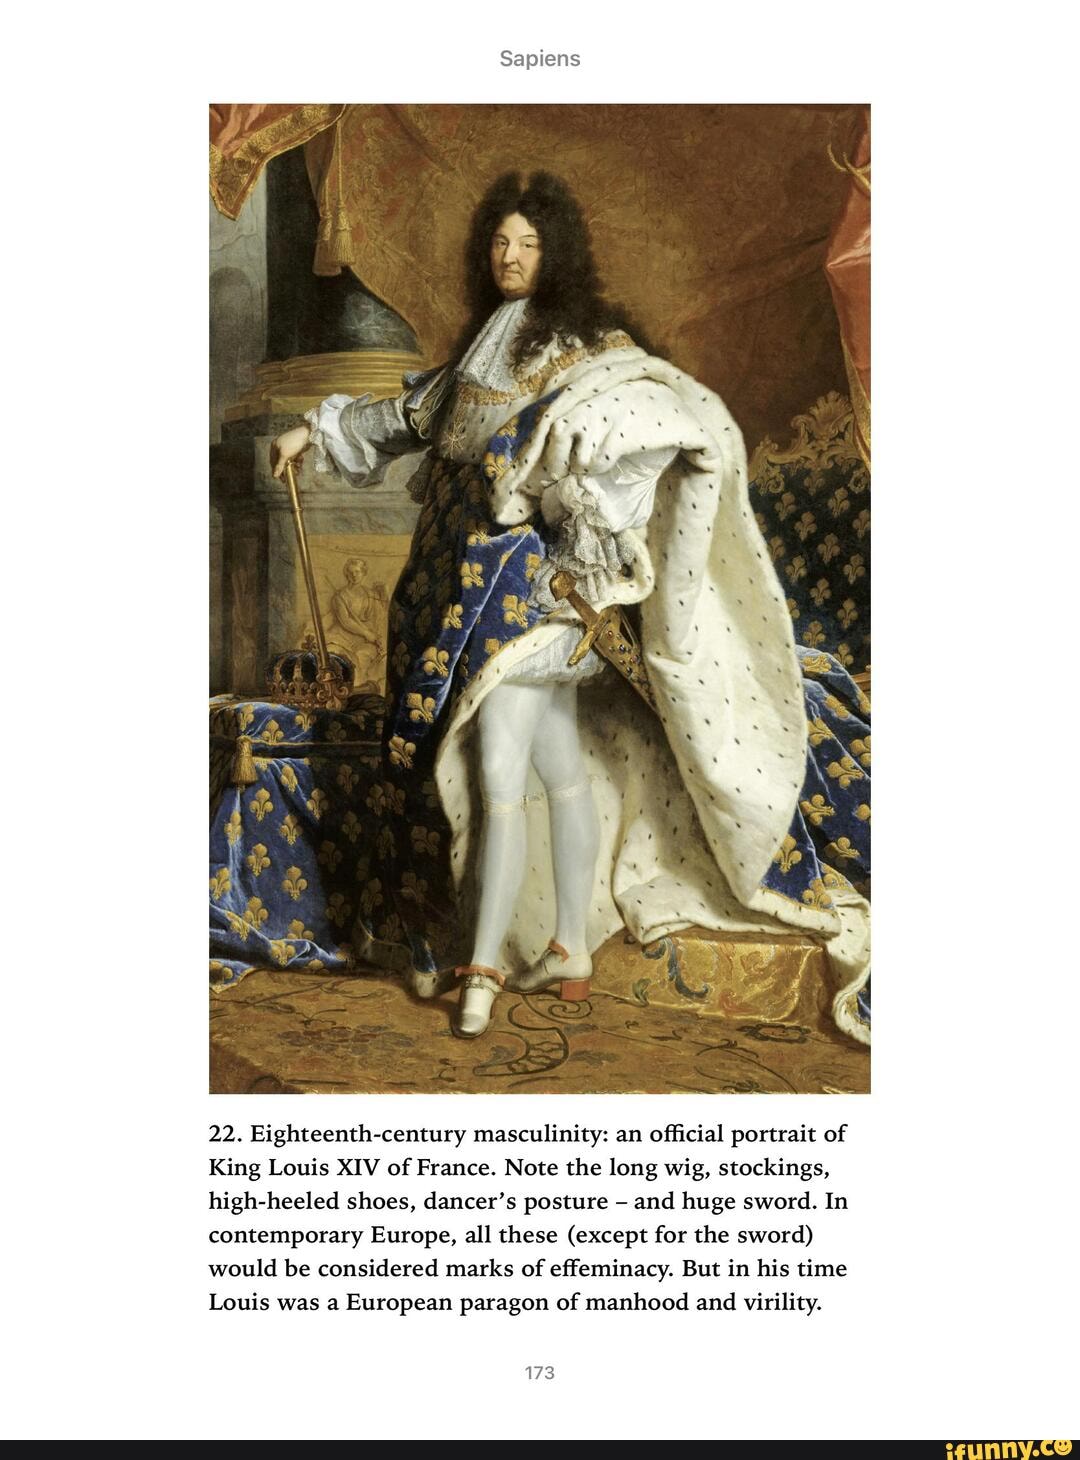 Sapiens 22. Eighteenth-century masculinity: an official portrait of King  Louis XIV of France. Note the